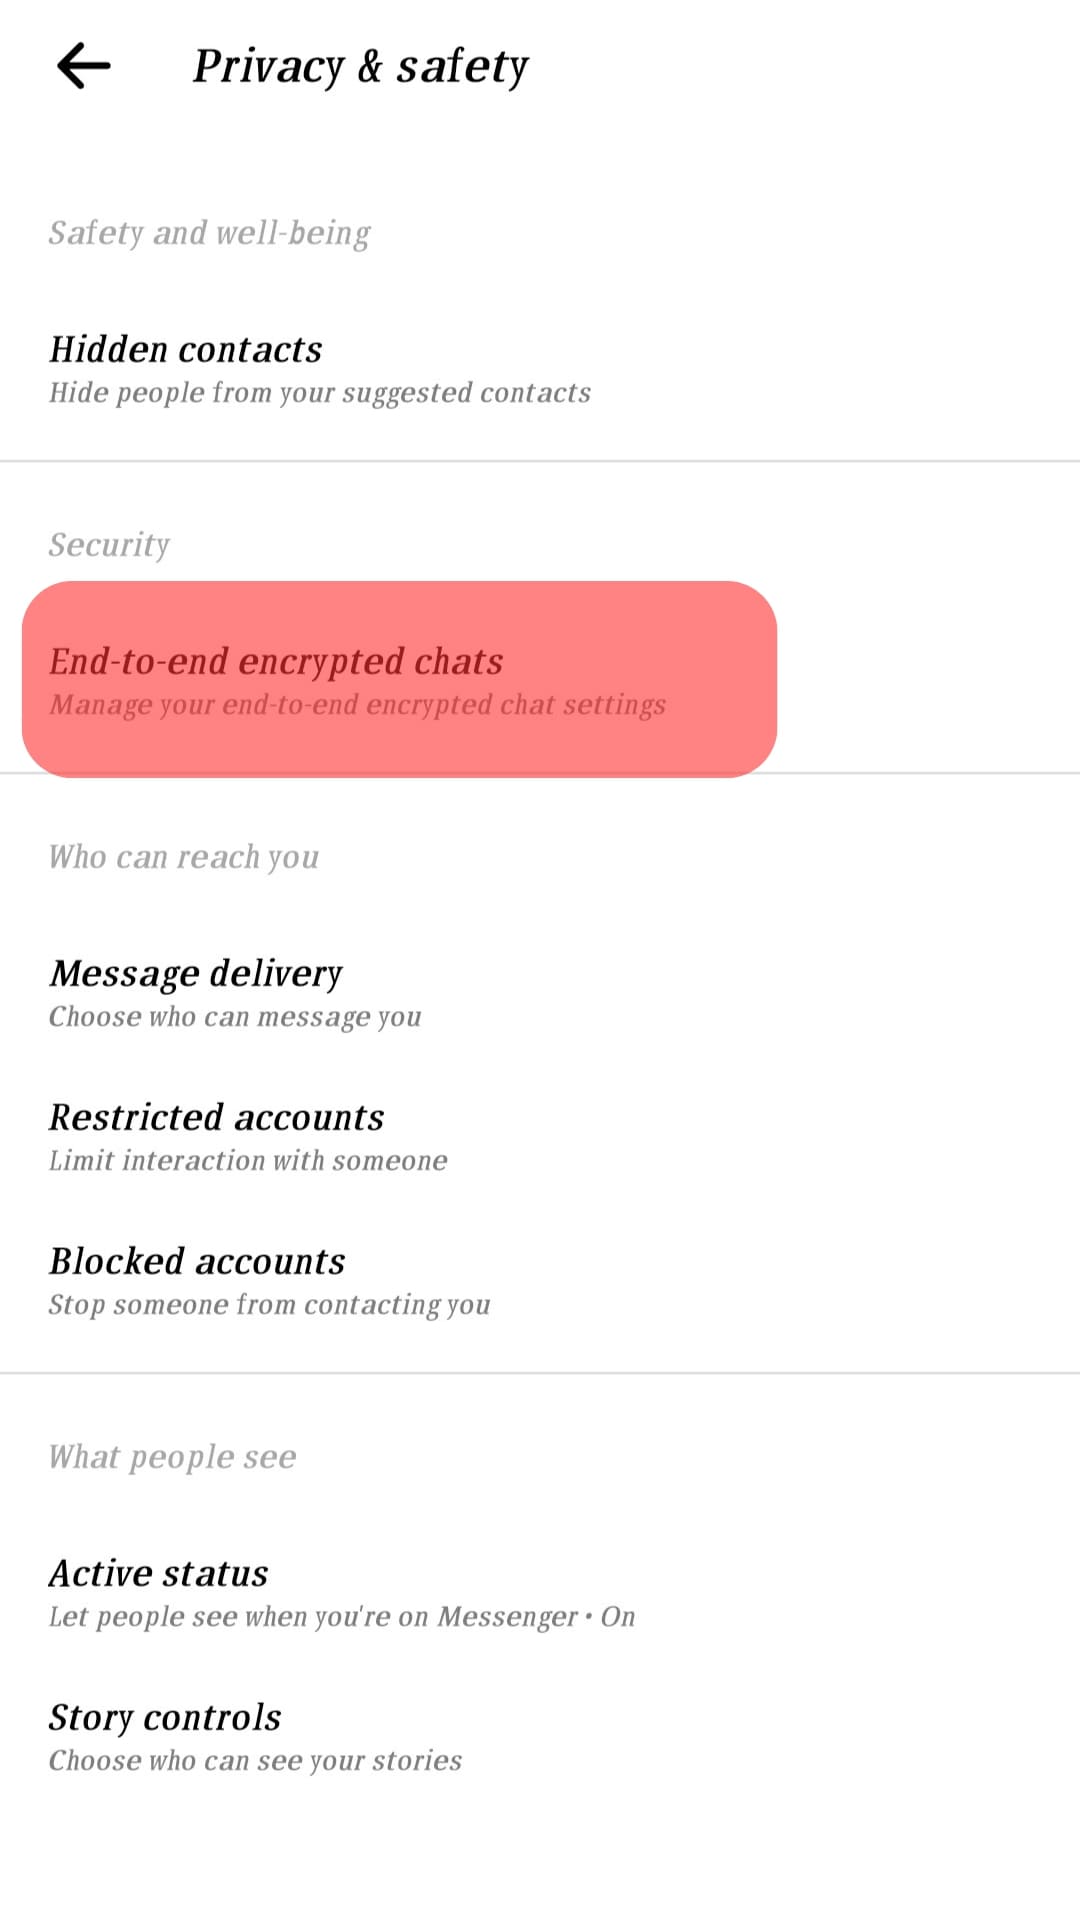 Select End-To-End Encrypted Chats.